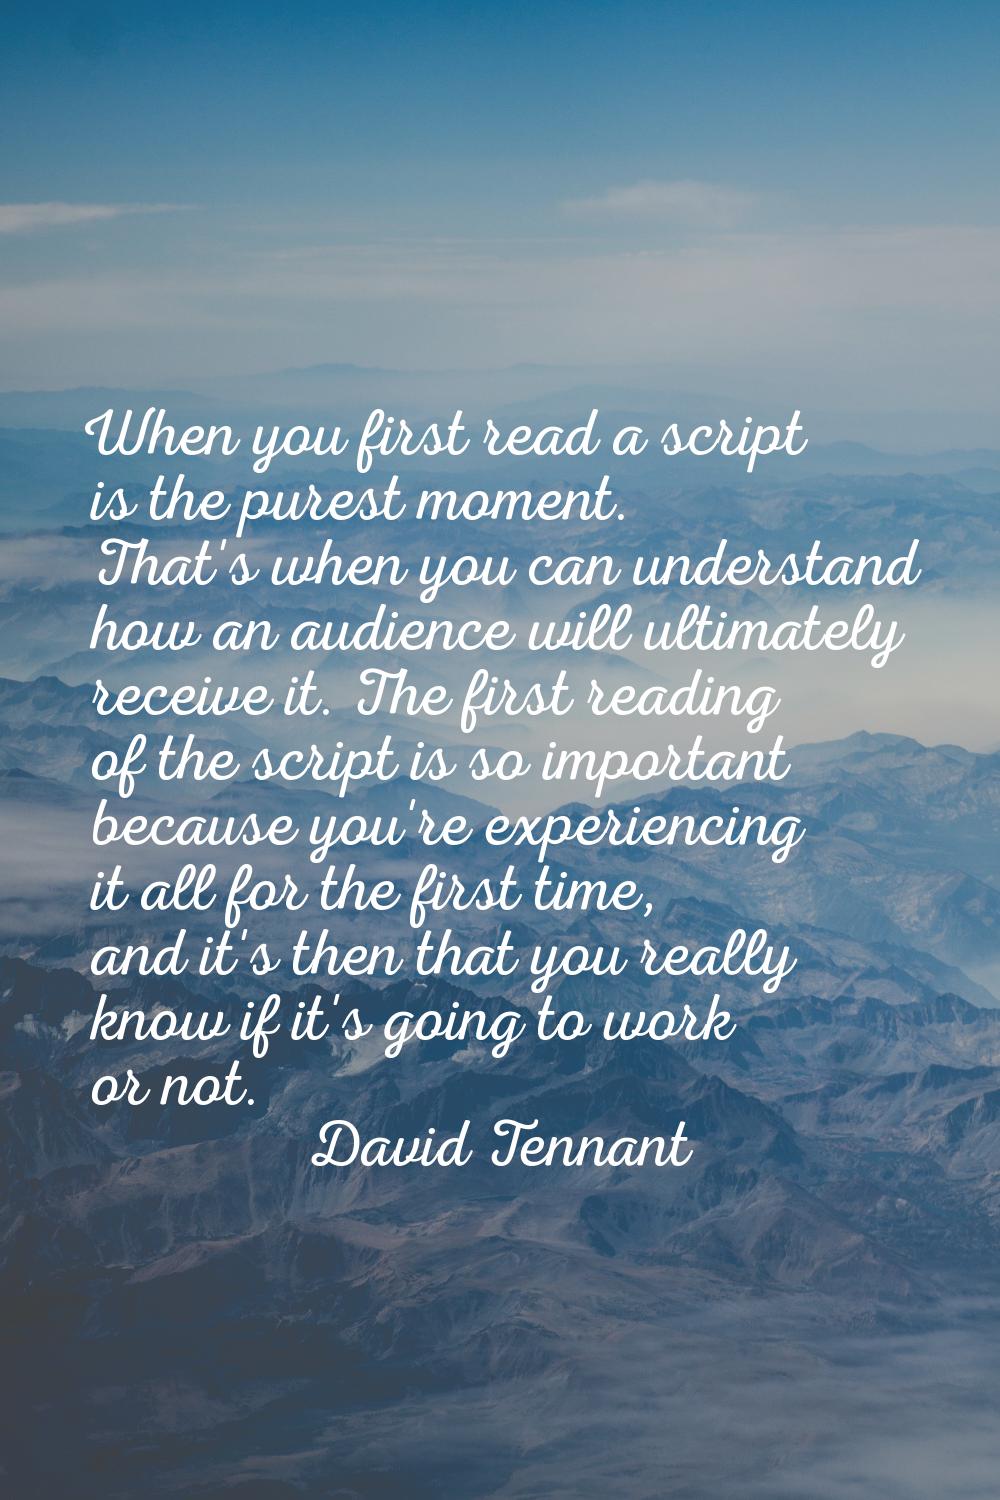 When you first read a script is the purest moment. That's when you can understand how an audience w